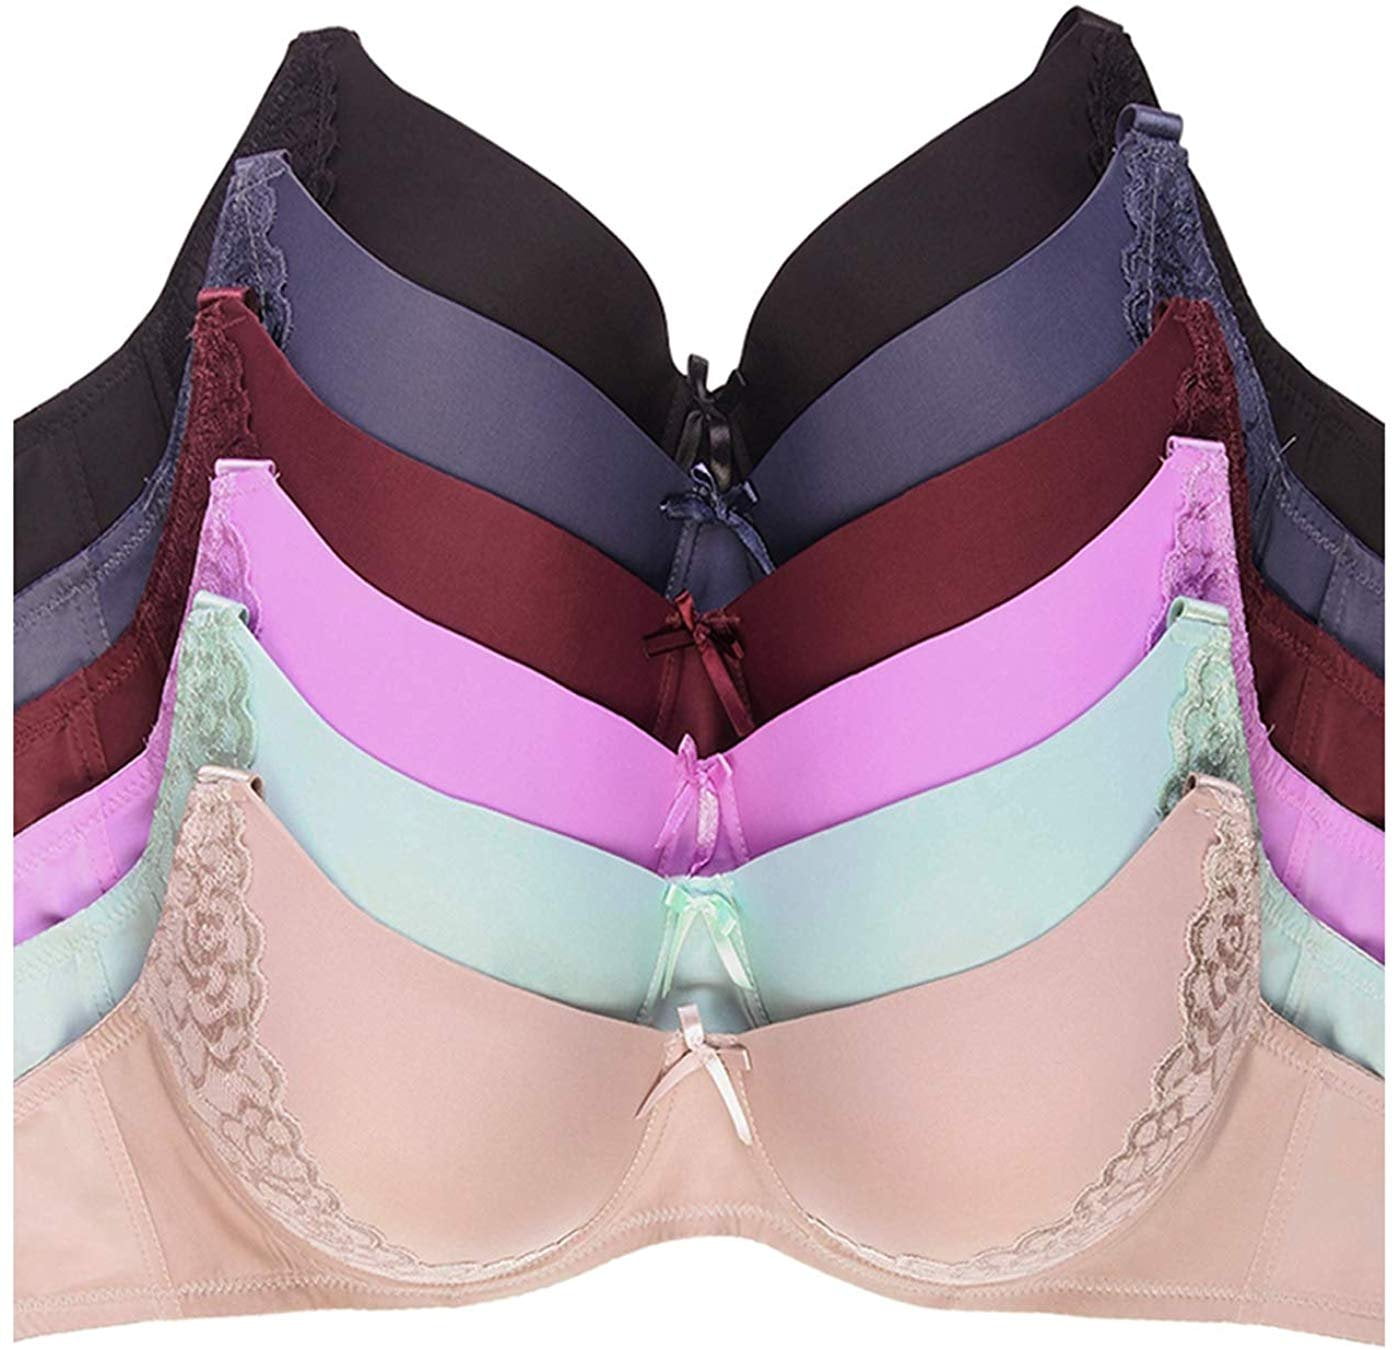 Womens 6 Pack of Everyday Plain, Lace, D, DD, DDD Cup Bra -Various Style  4161L3D4, 36DD 